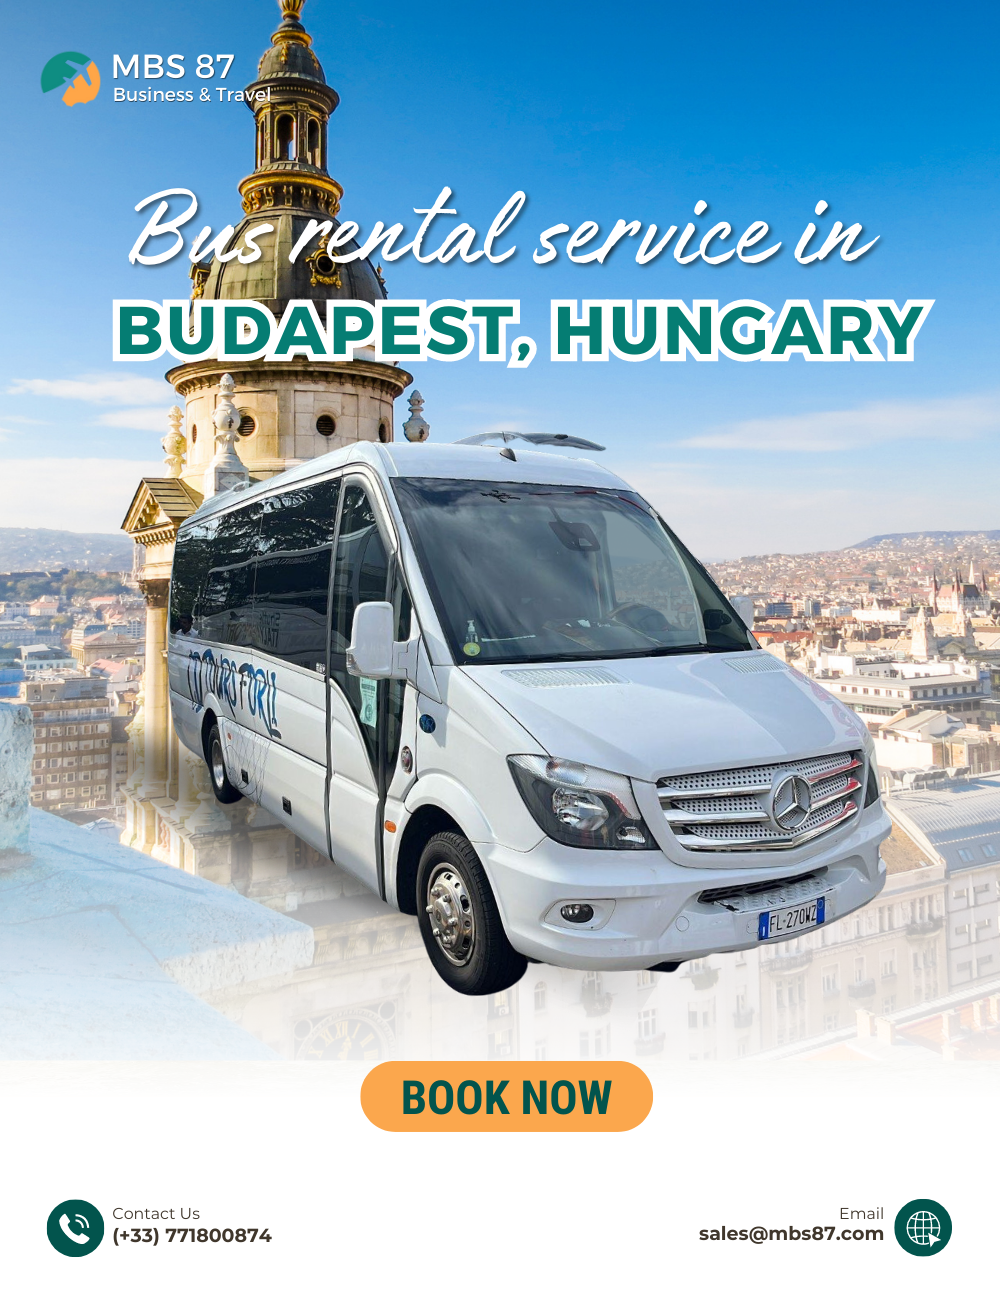 Discover the Best Long Distance Bus Routes from Budapest, Hungary